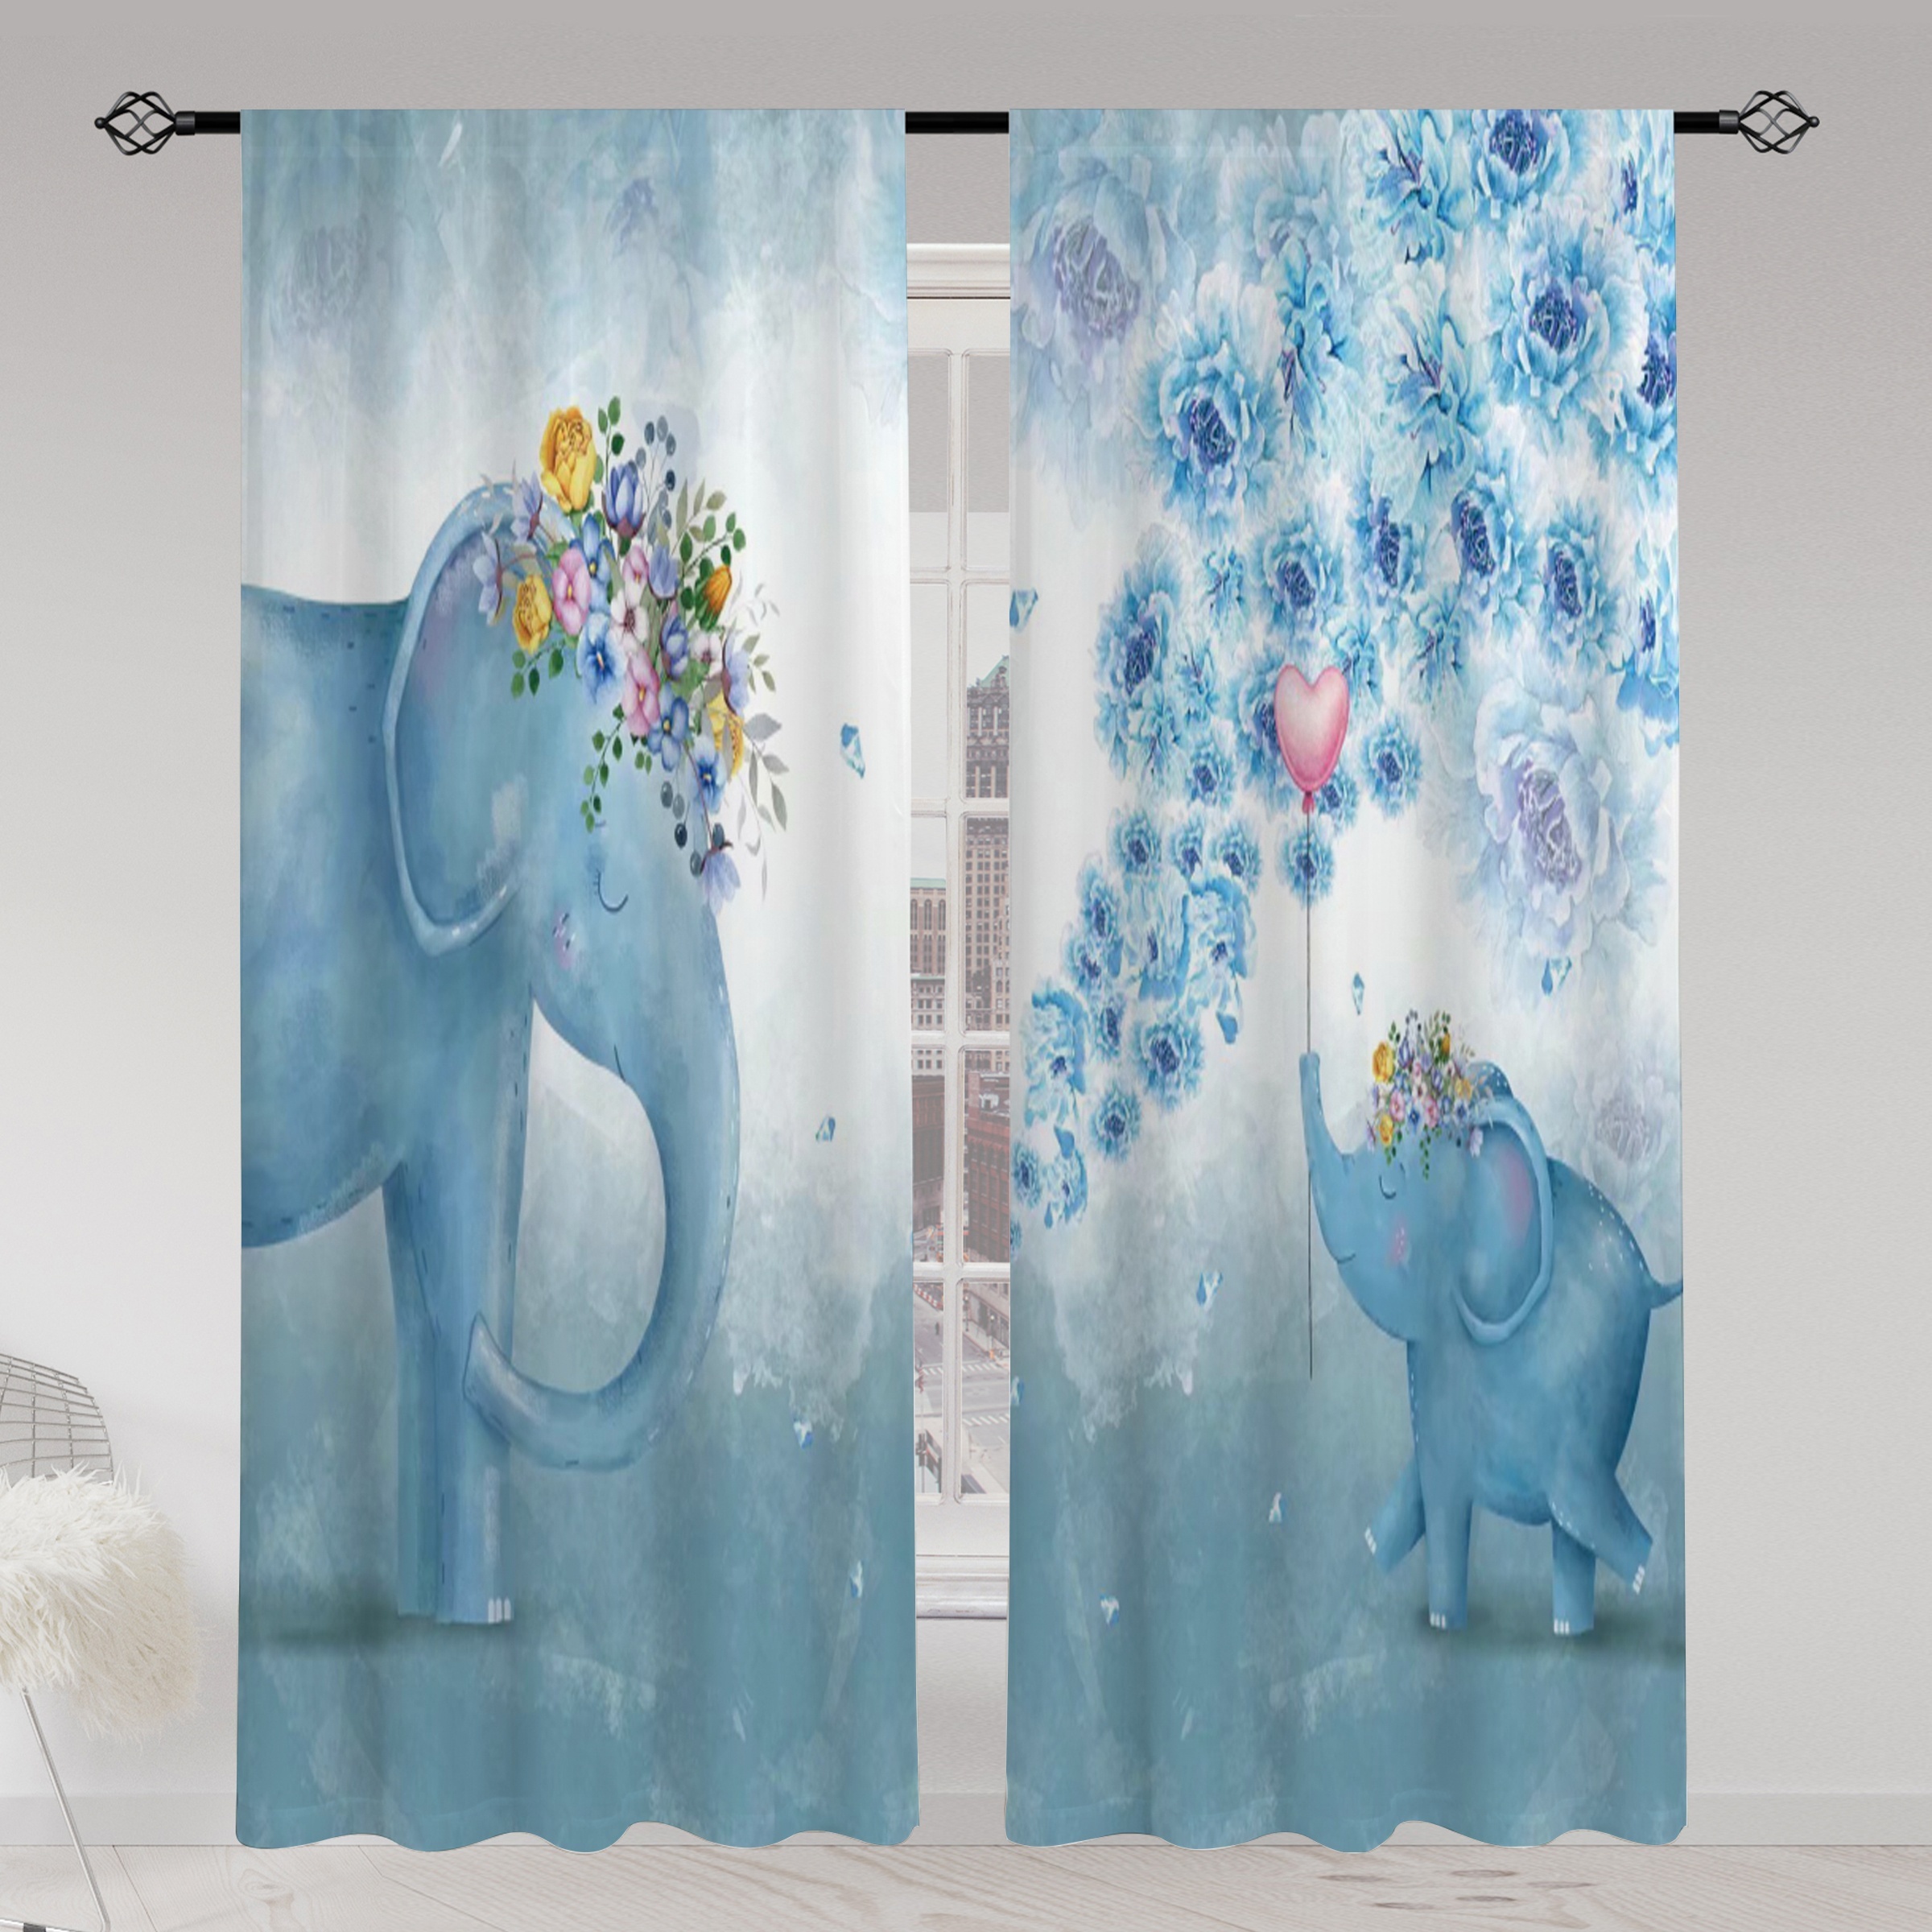 

2pcs, Blue Elephant Flower Balloon Print Translucent Curtains, Multi-scene Polyester Rod Pocket Curtain For Living Room Playroom Bedroom Home Decor Party Supplies